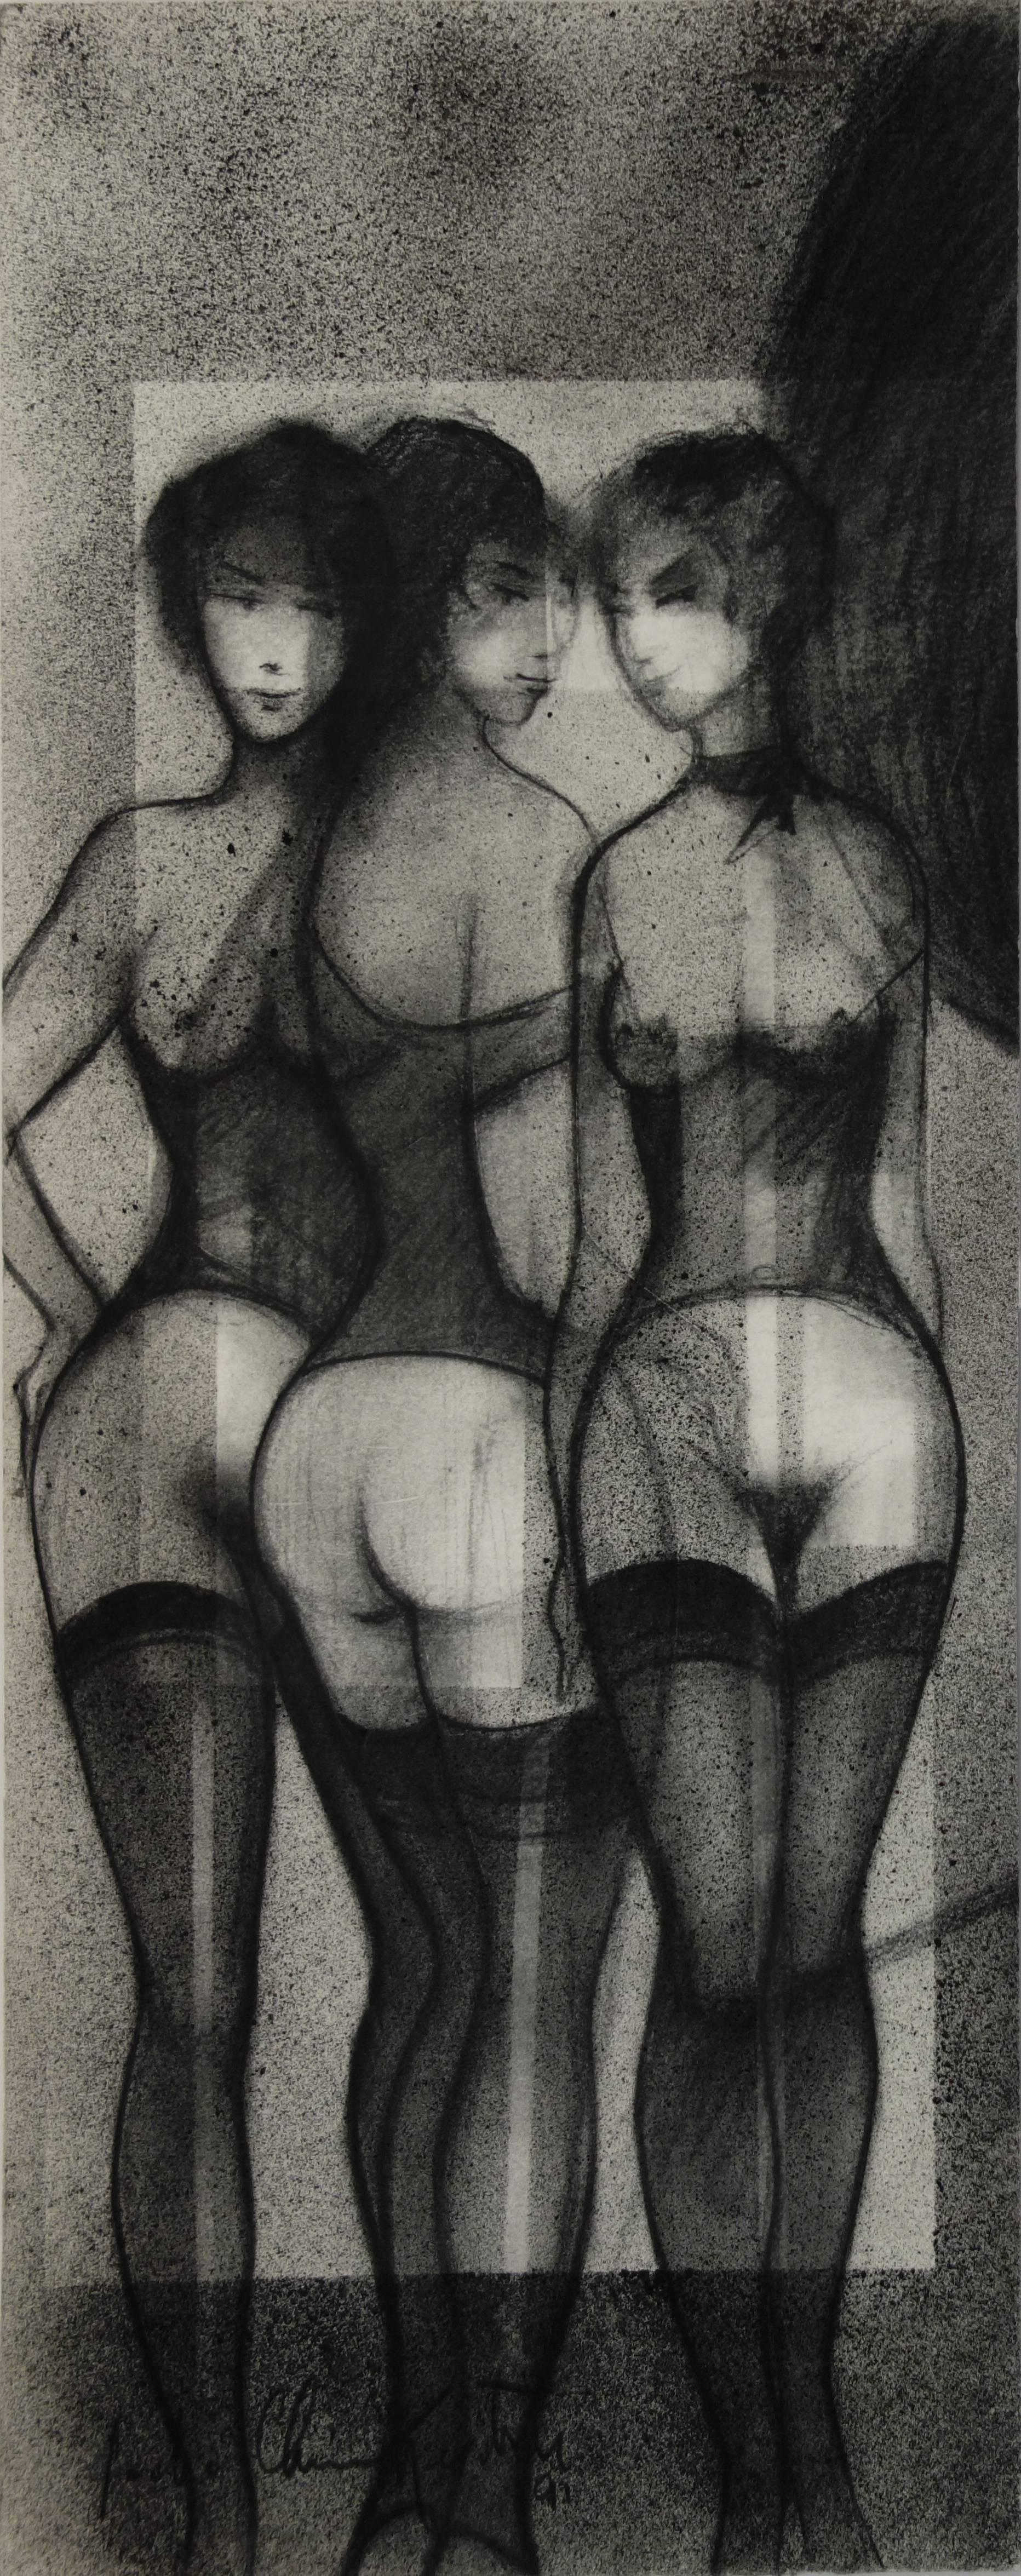 Sacha Chimkevitch Nude - Three Graces with Garters - Original Signed Charcoal Drawing - 1991